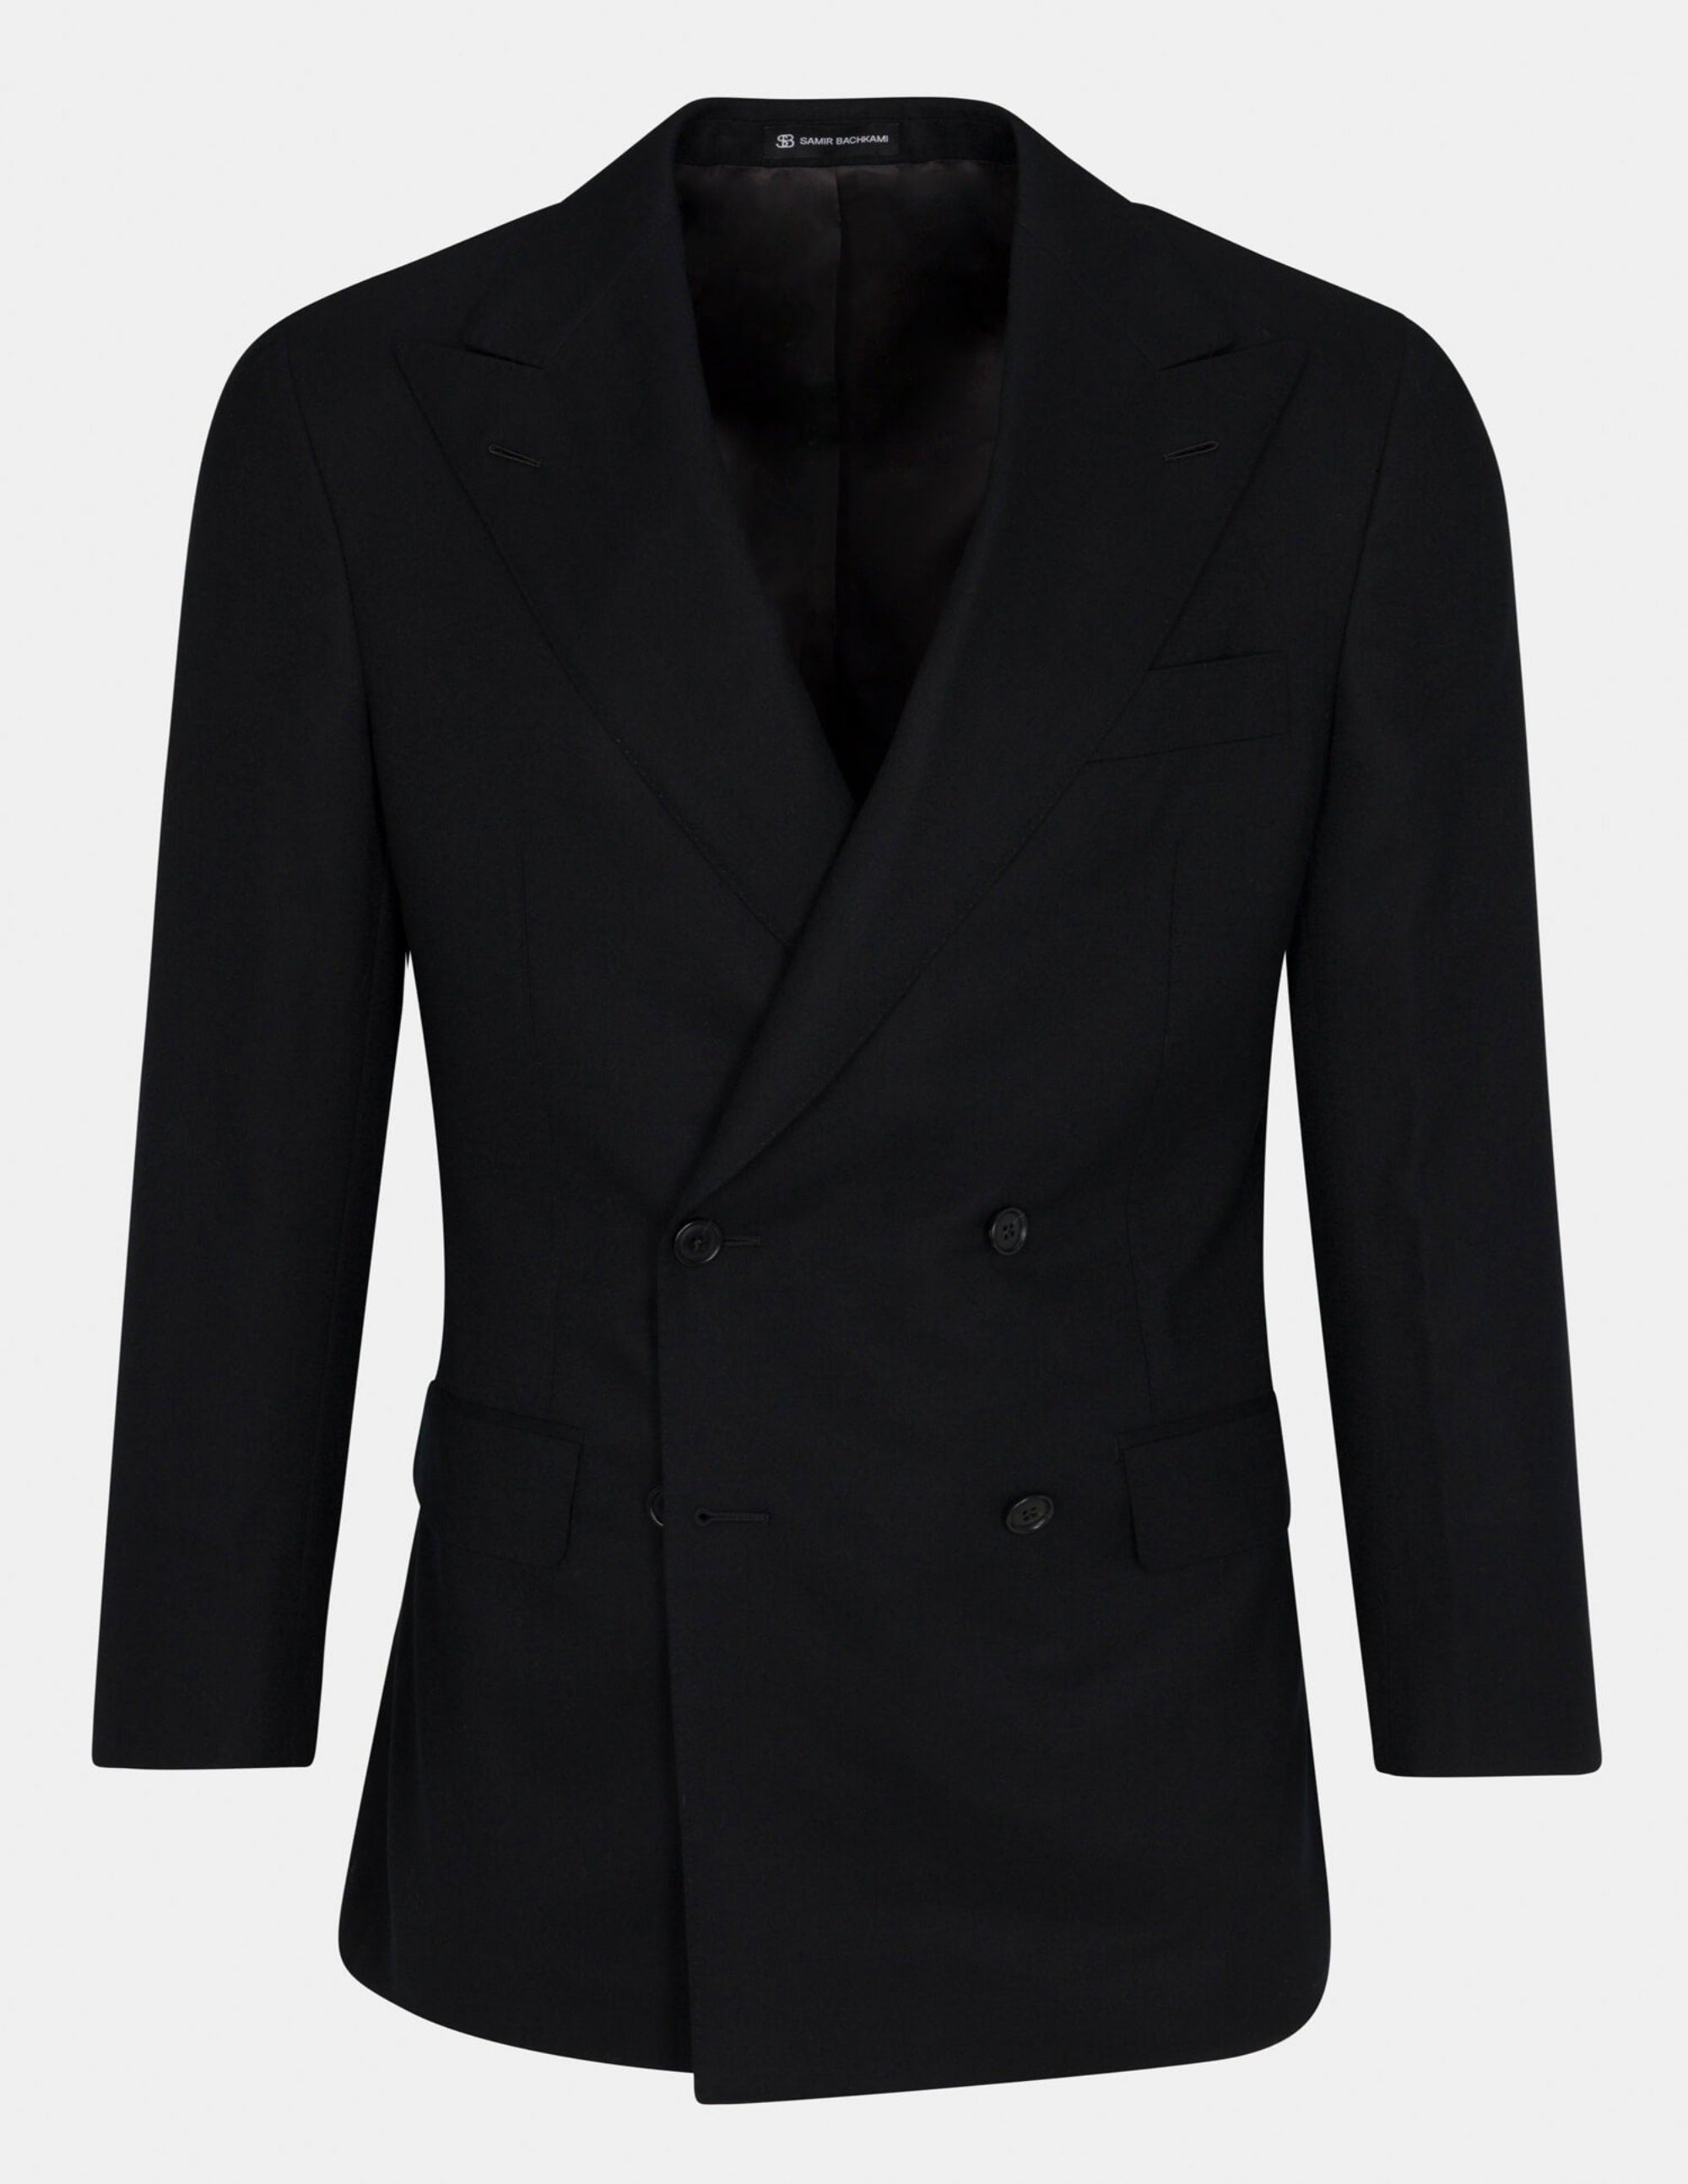 Black Wool Cashmere Double Breasted Jacket - Samir Bachkami